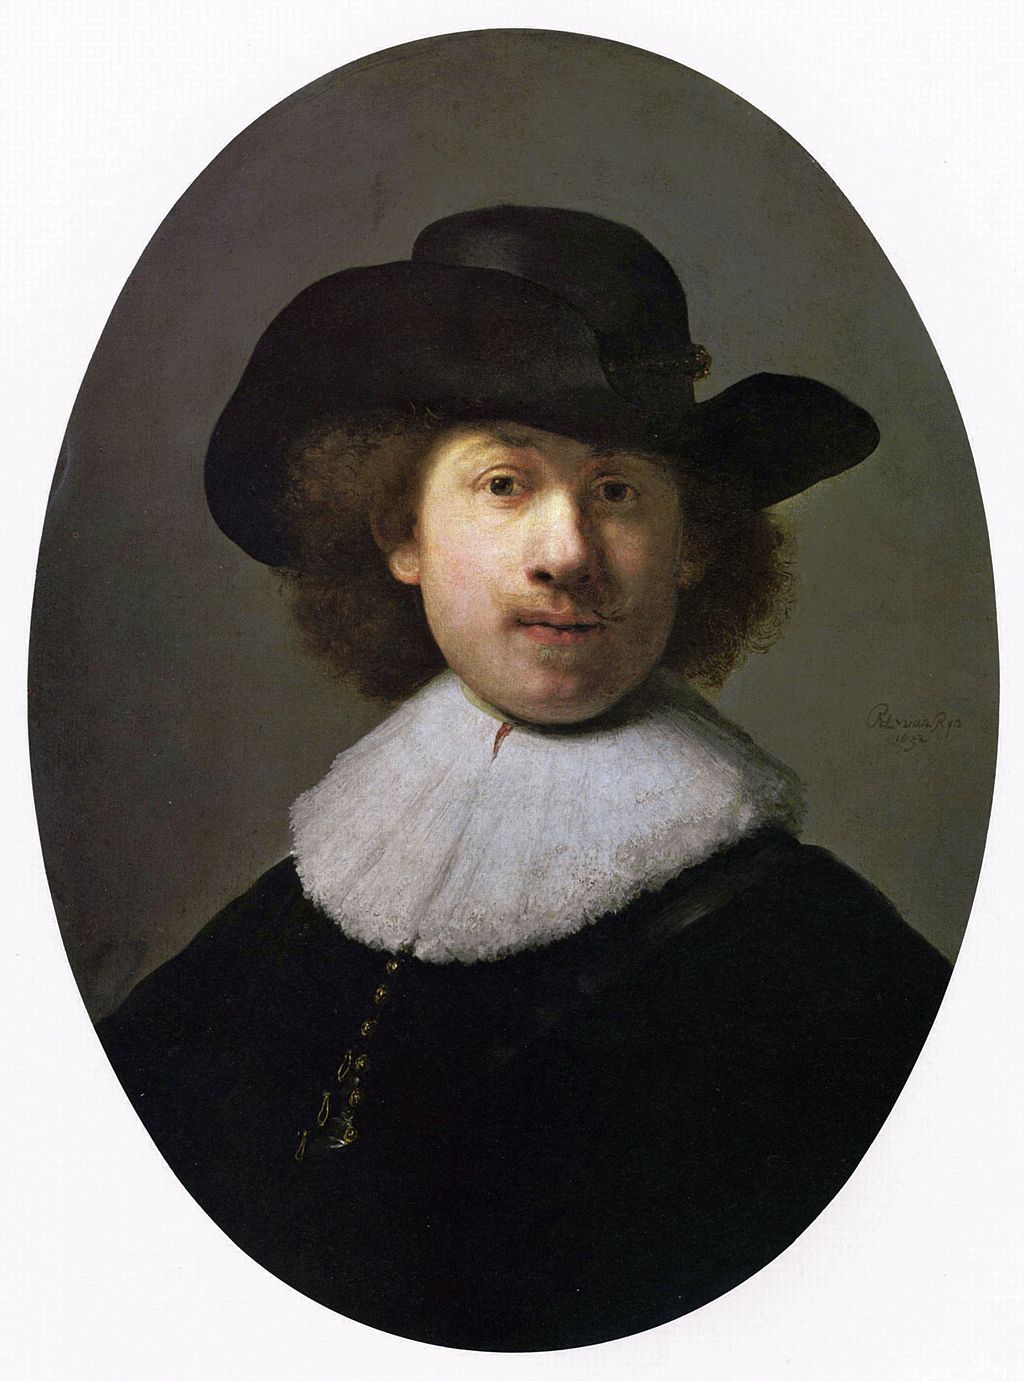 Self-portrait as a Burger Painting by Rembrandt Oil on Canvas Reproduction by Blue Surf Art